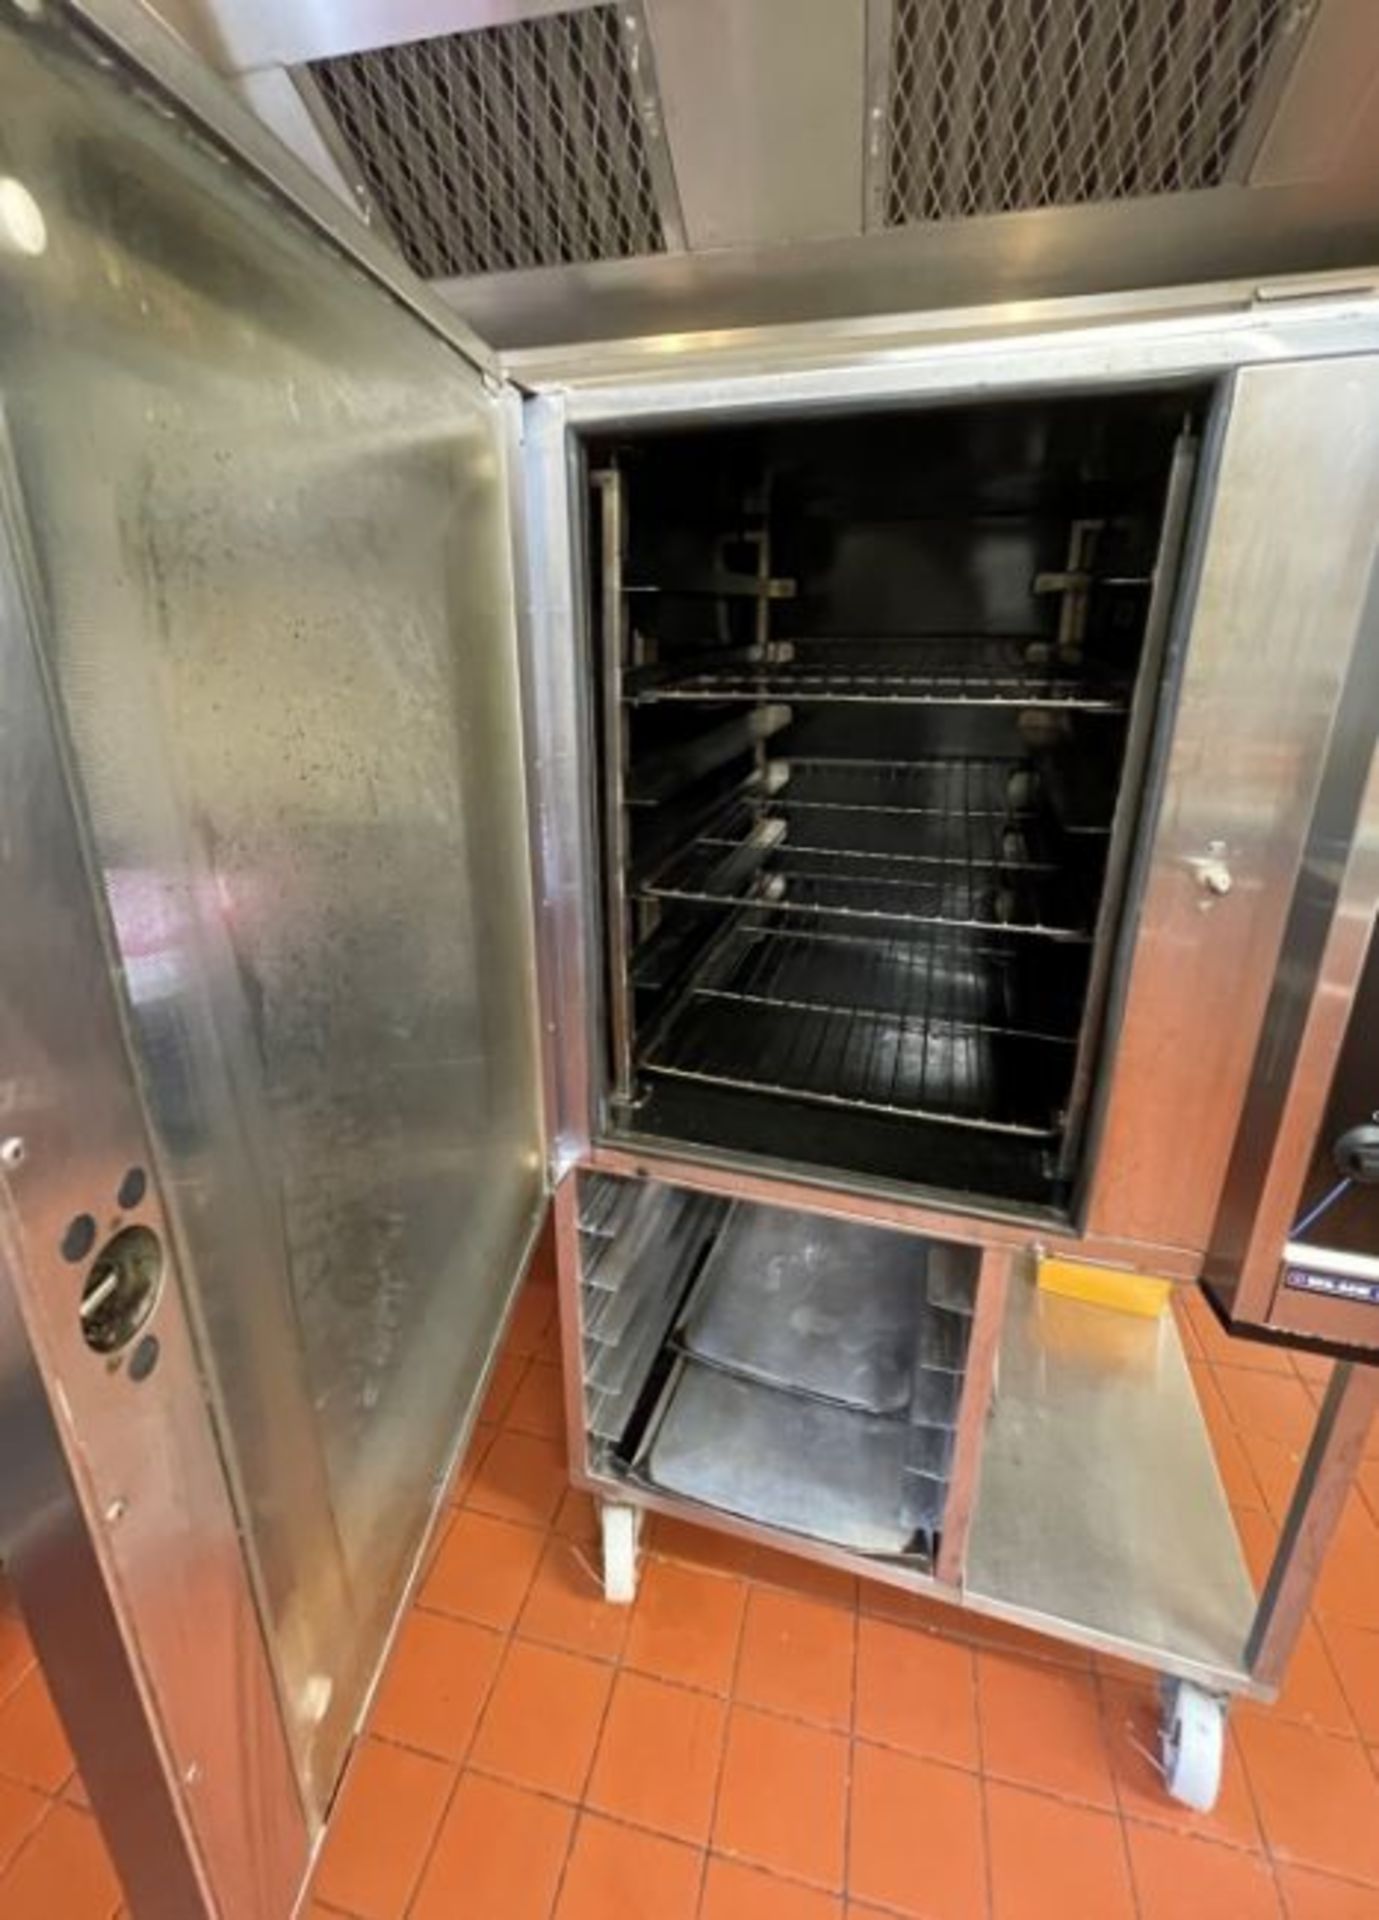 1 x Blue Seal Moffat Turbofan E35 Convection Oven With Stand - Model E35-30-453 - 400v Power - - Image 7 of 16